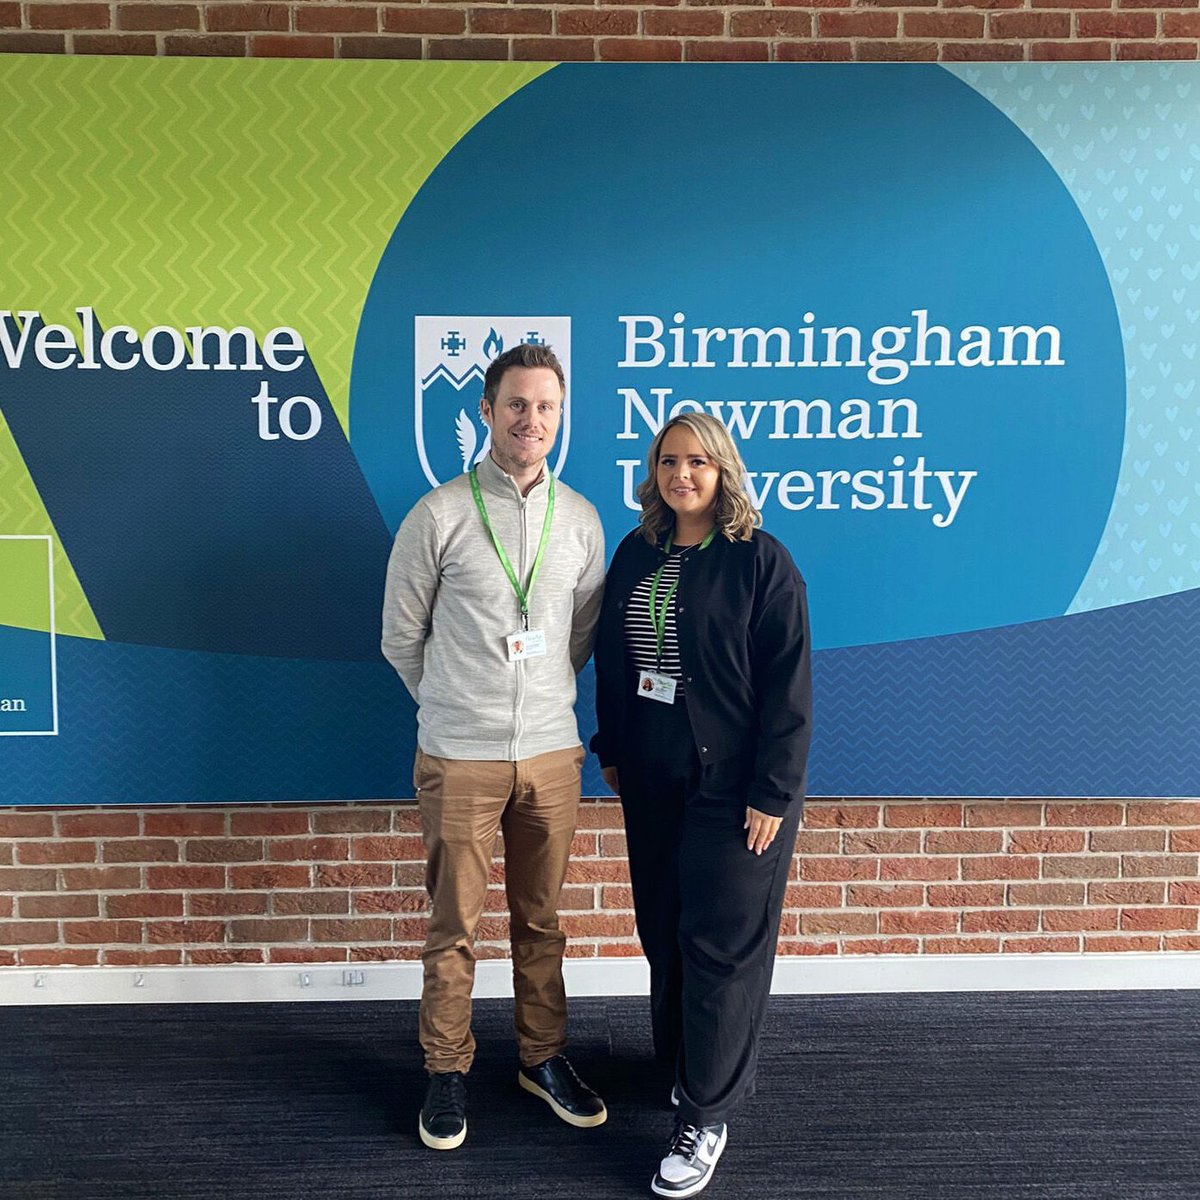 We had a great day at @Newman_Uni today, meeting the #students who are graduating this year. If you're a soon-to-be #ECT graduate & you're unsure of what you want to do next year, get in touch as we can support you no matter what route you take. Call us on 0300 303 3227!